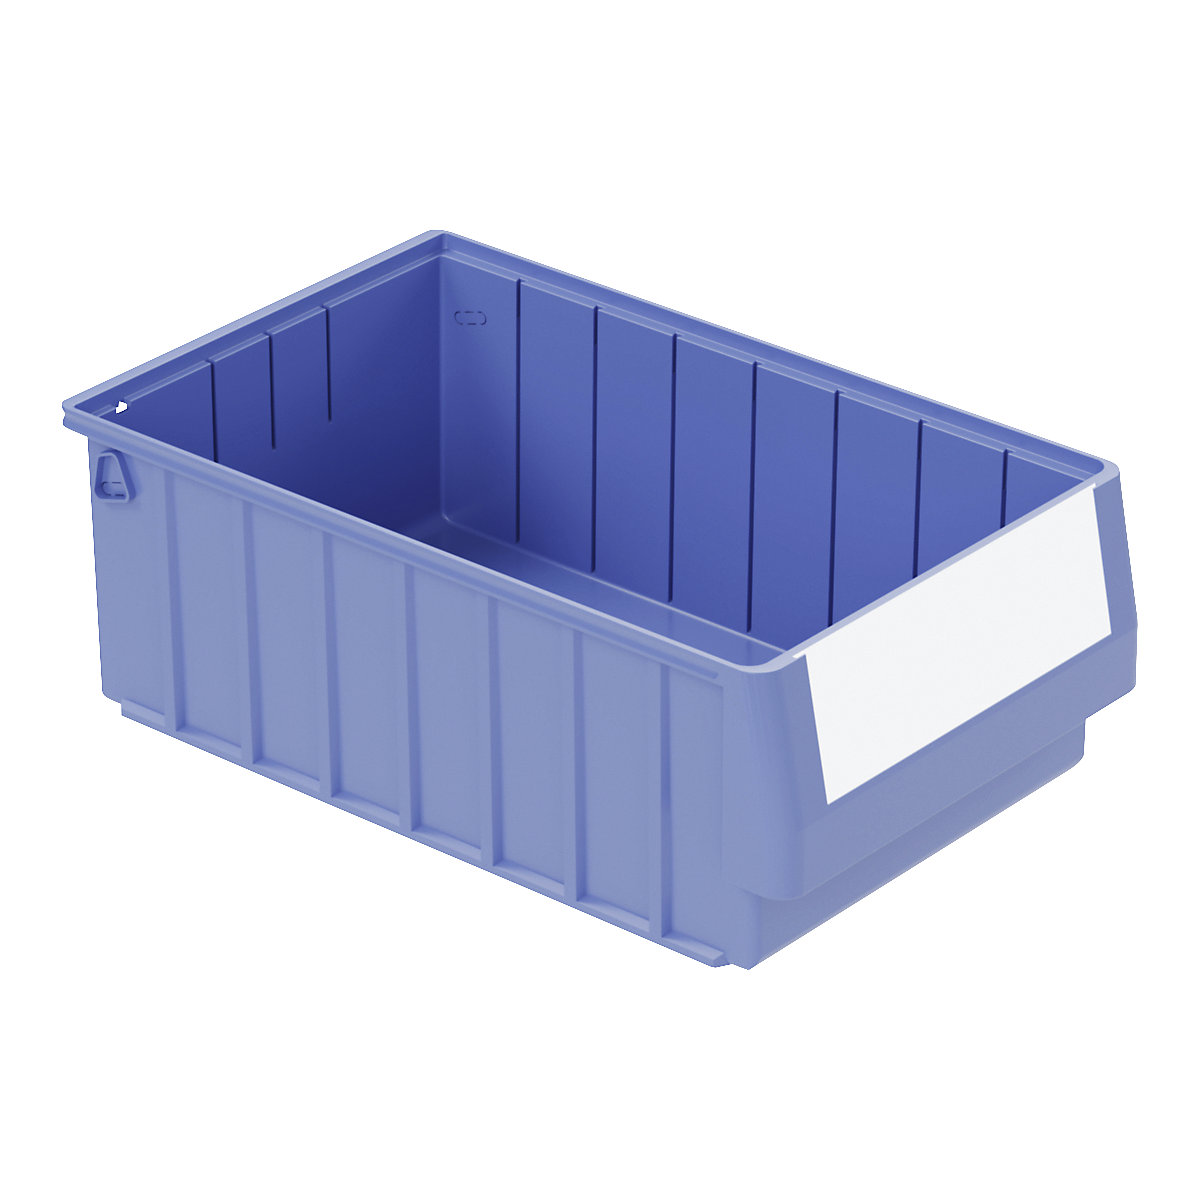 Shelf bin – BITO, made of PP, LxWxH 400 x 234 x 140 mm, pack of 6-3